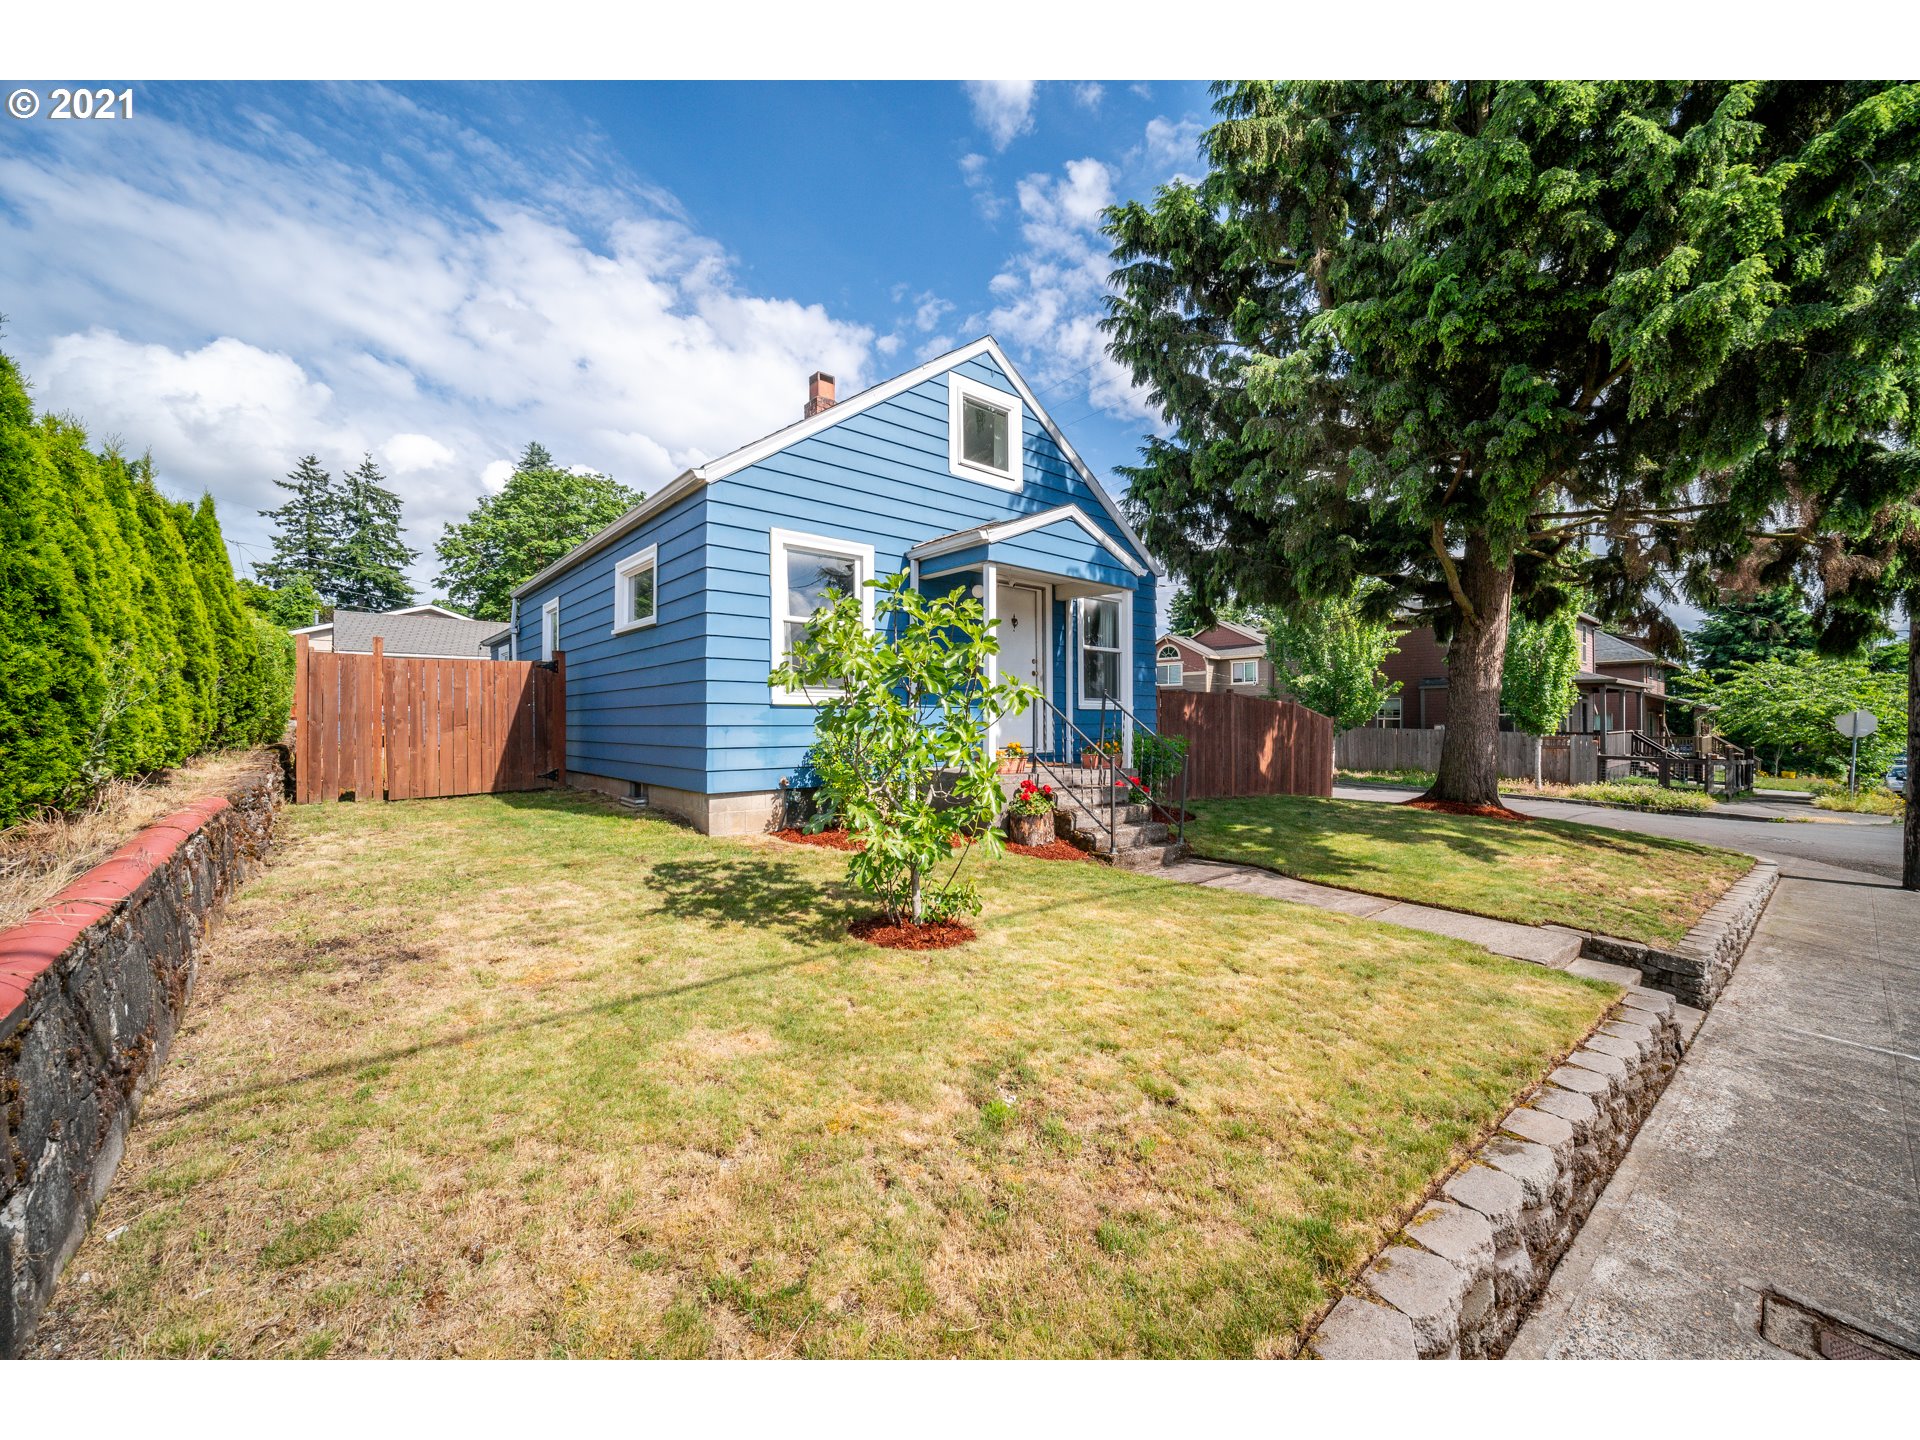 4850 SE 86TH AVE (1 of 30)